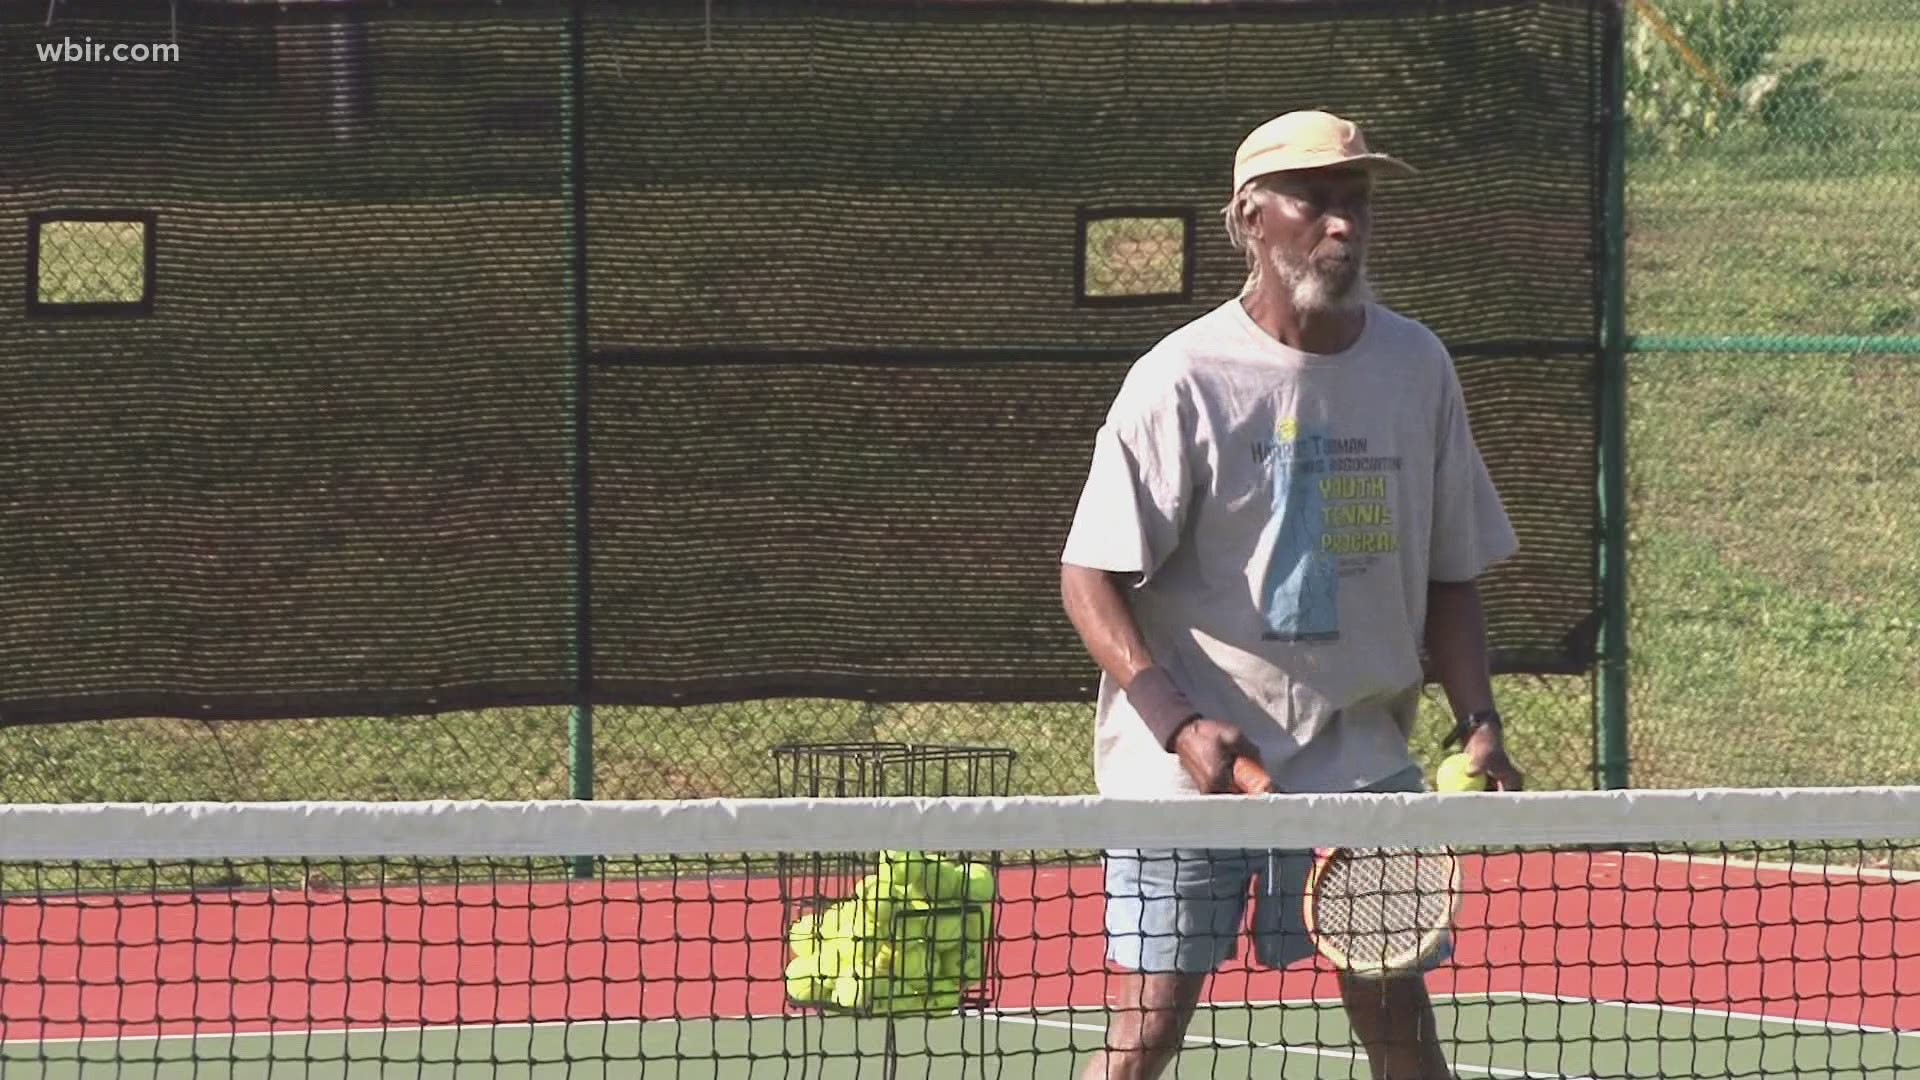 The first event was Monday at Harriet Tubman Park. Folks could play some tennis and basketball.